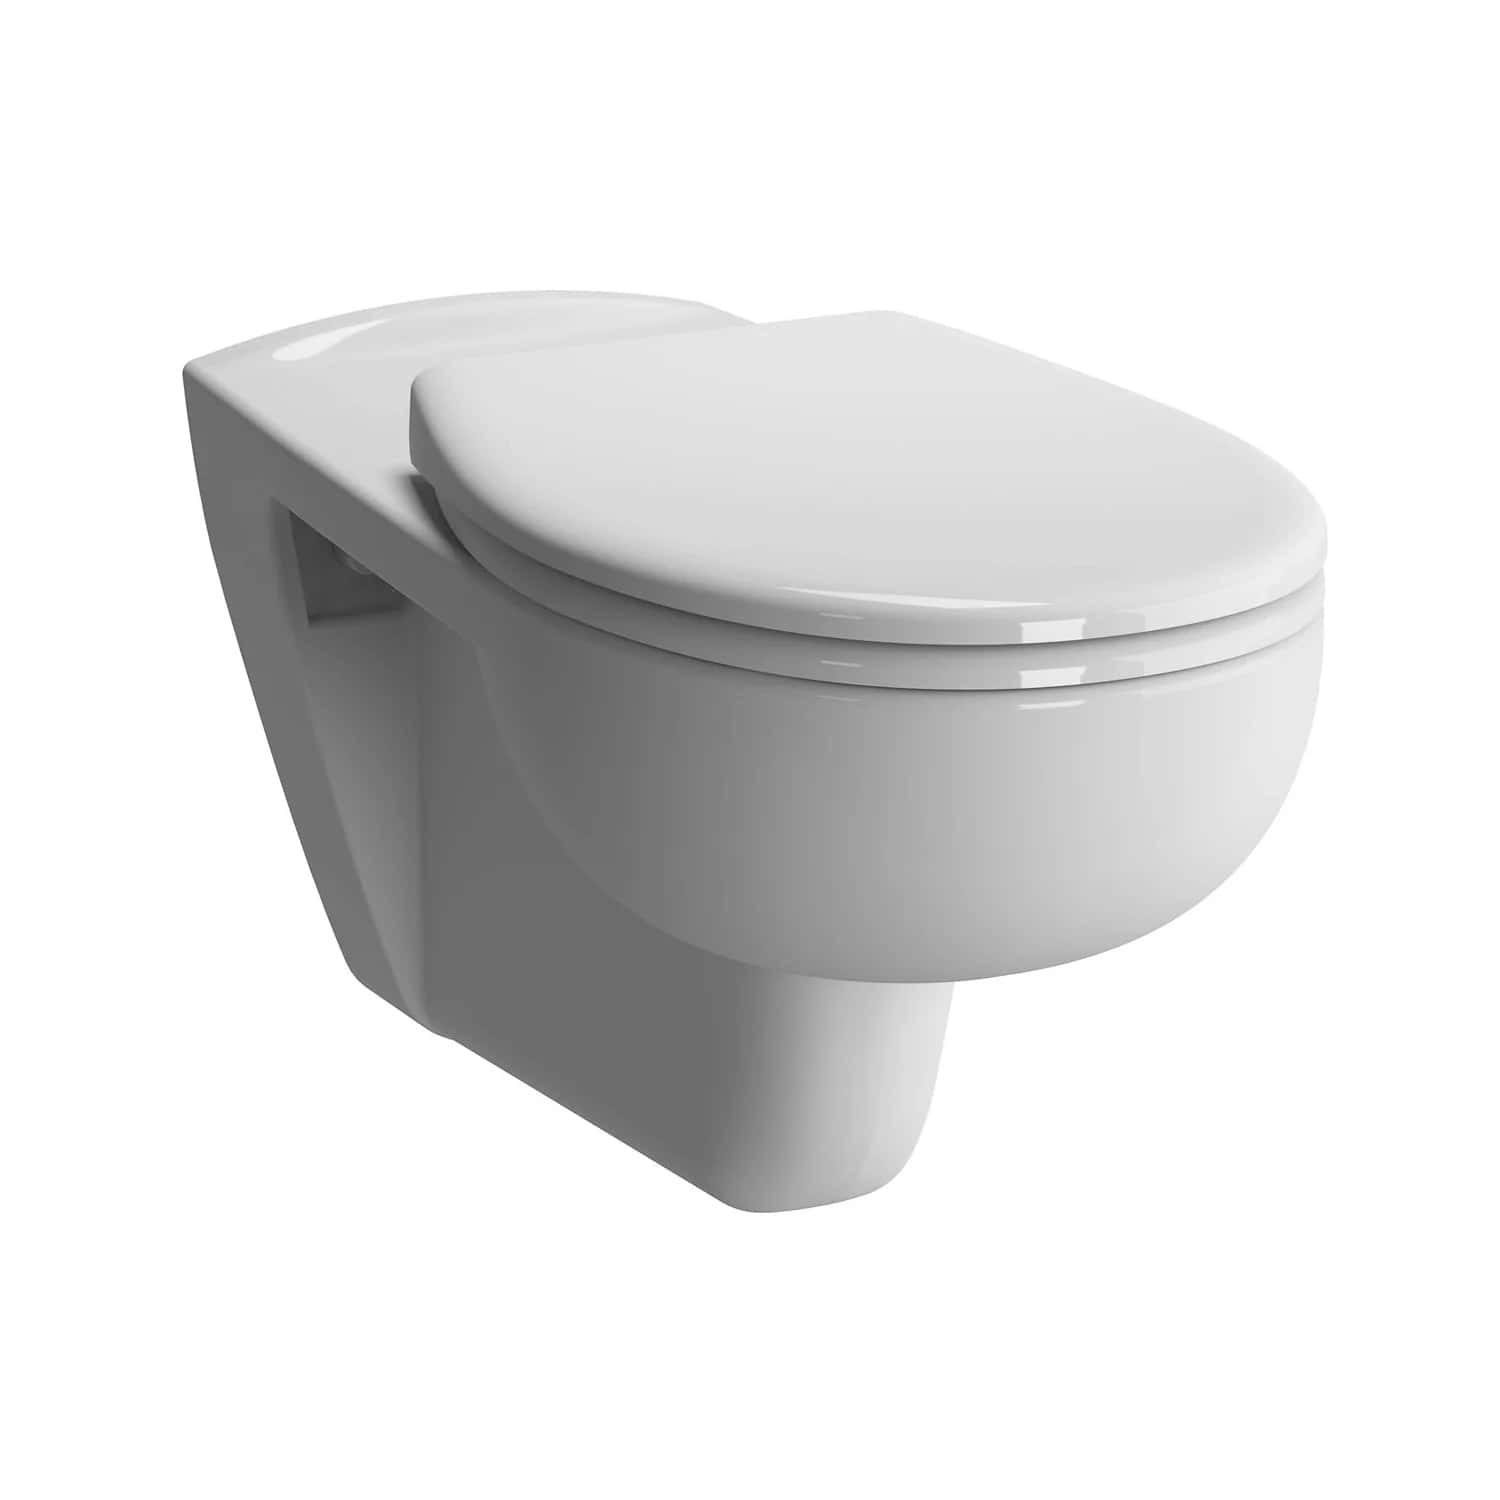 Get the most out of your bathroom experience with this sleek, new toilet.